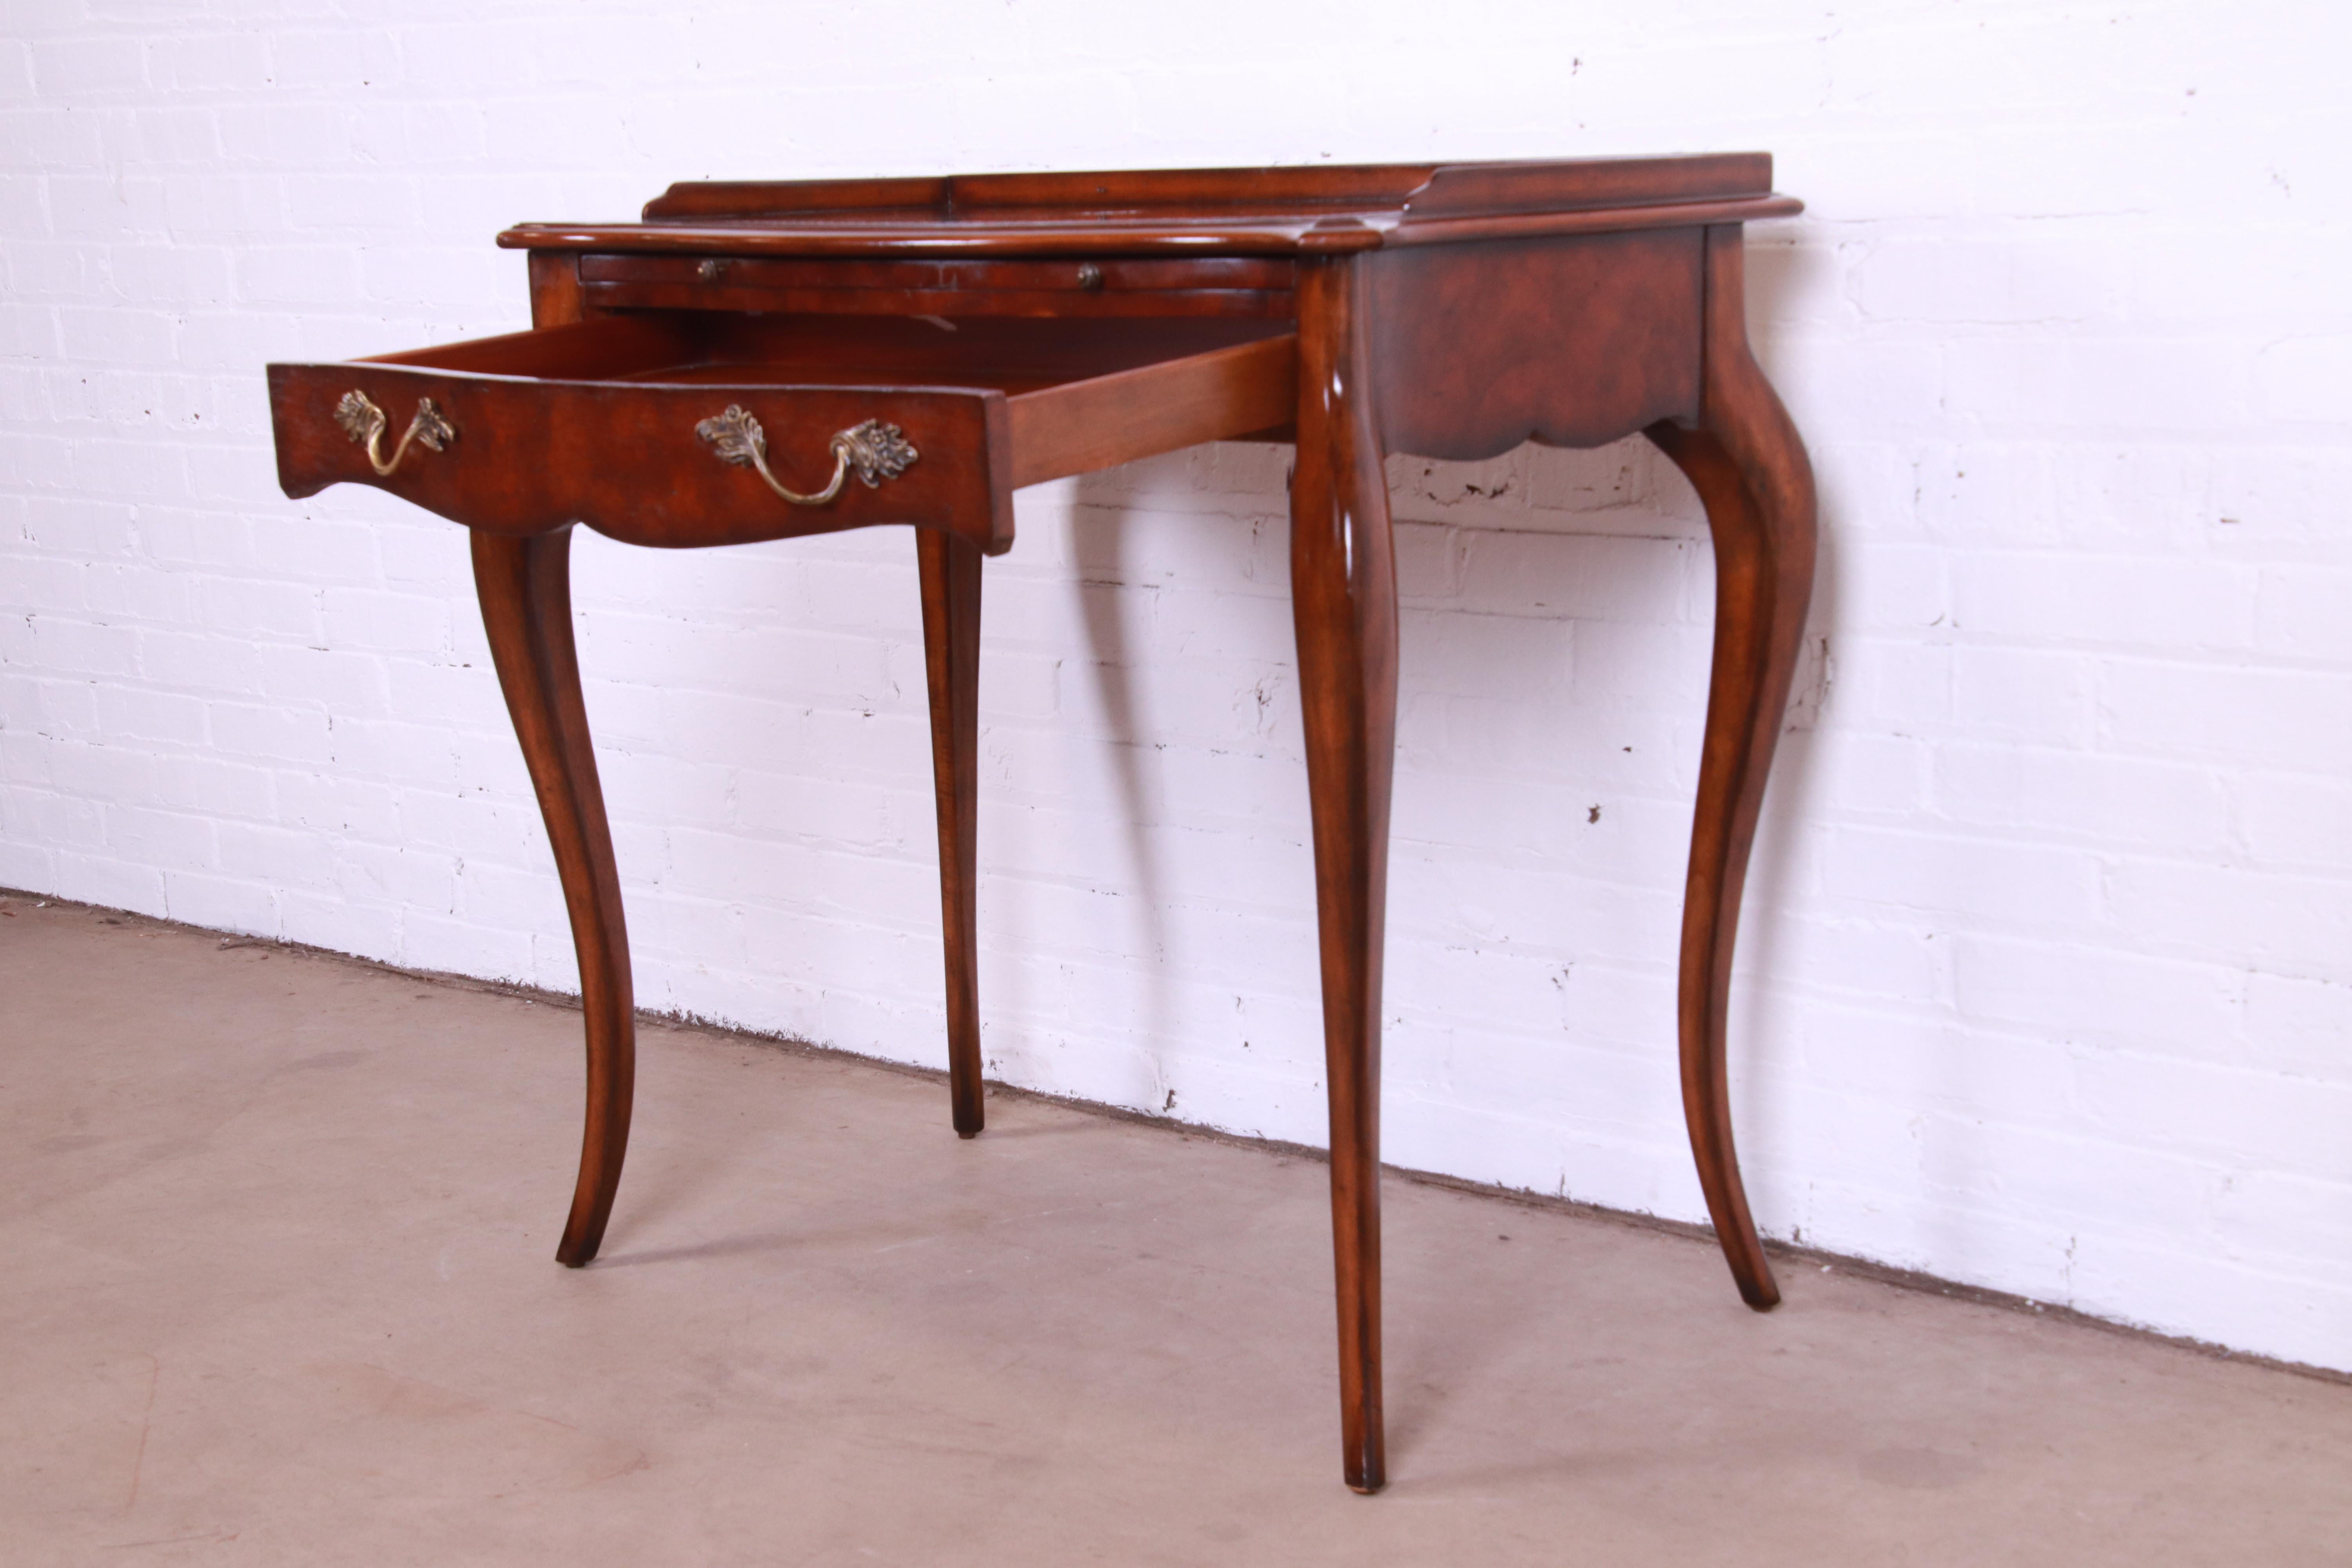 Maitland Smith French Provincial Louis XV Mahogany Leather Top Writing Desk In Good Condition For Sale In South Bend, IN